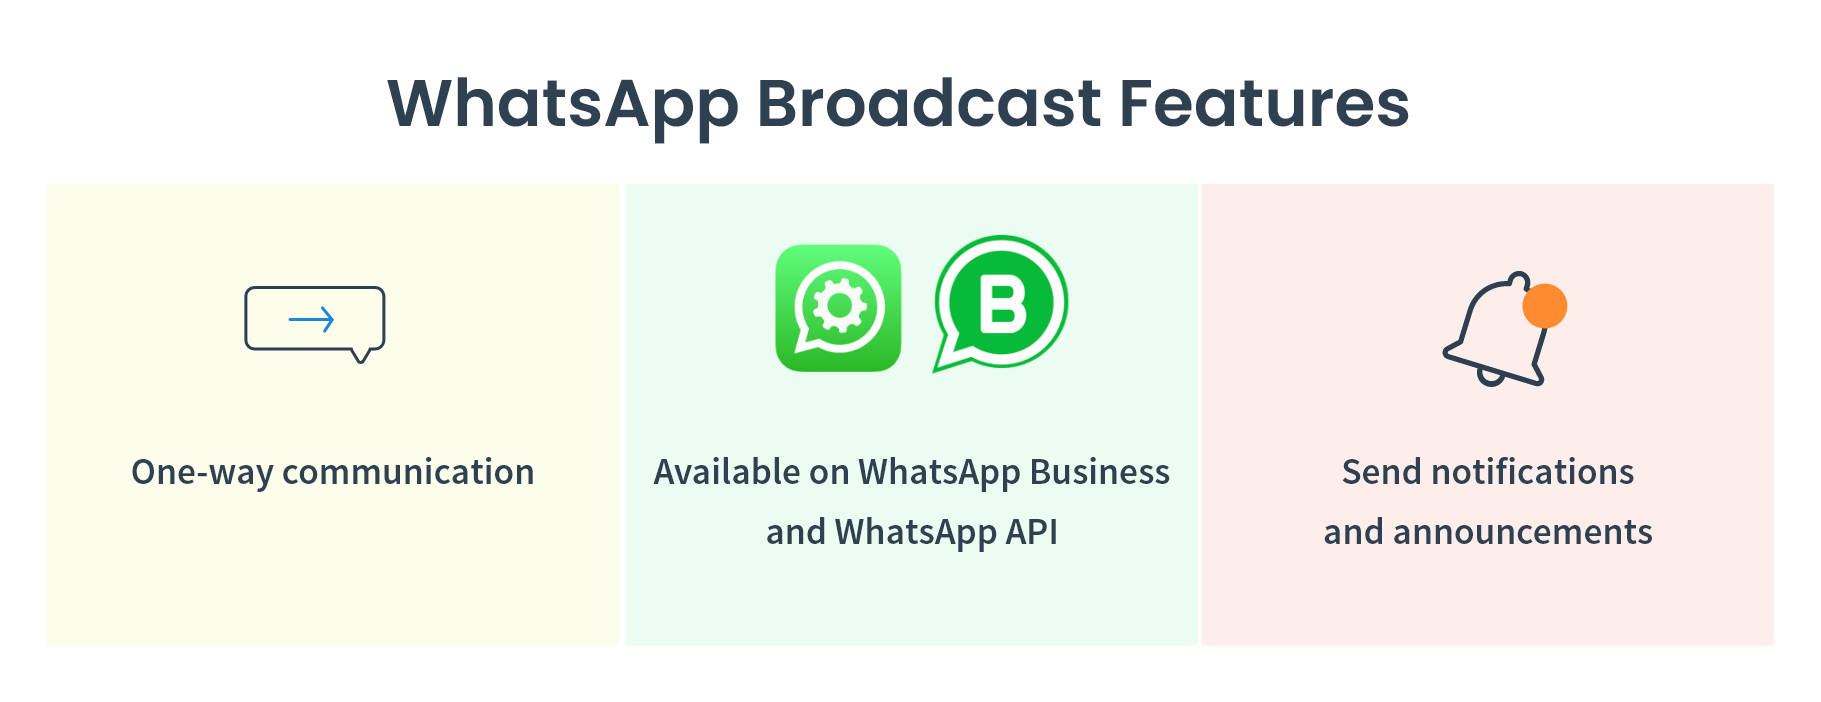 WhatsApp broadcast features